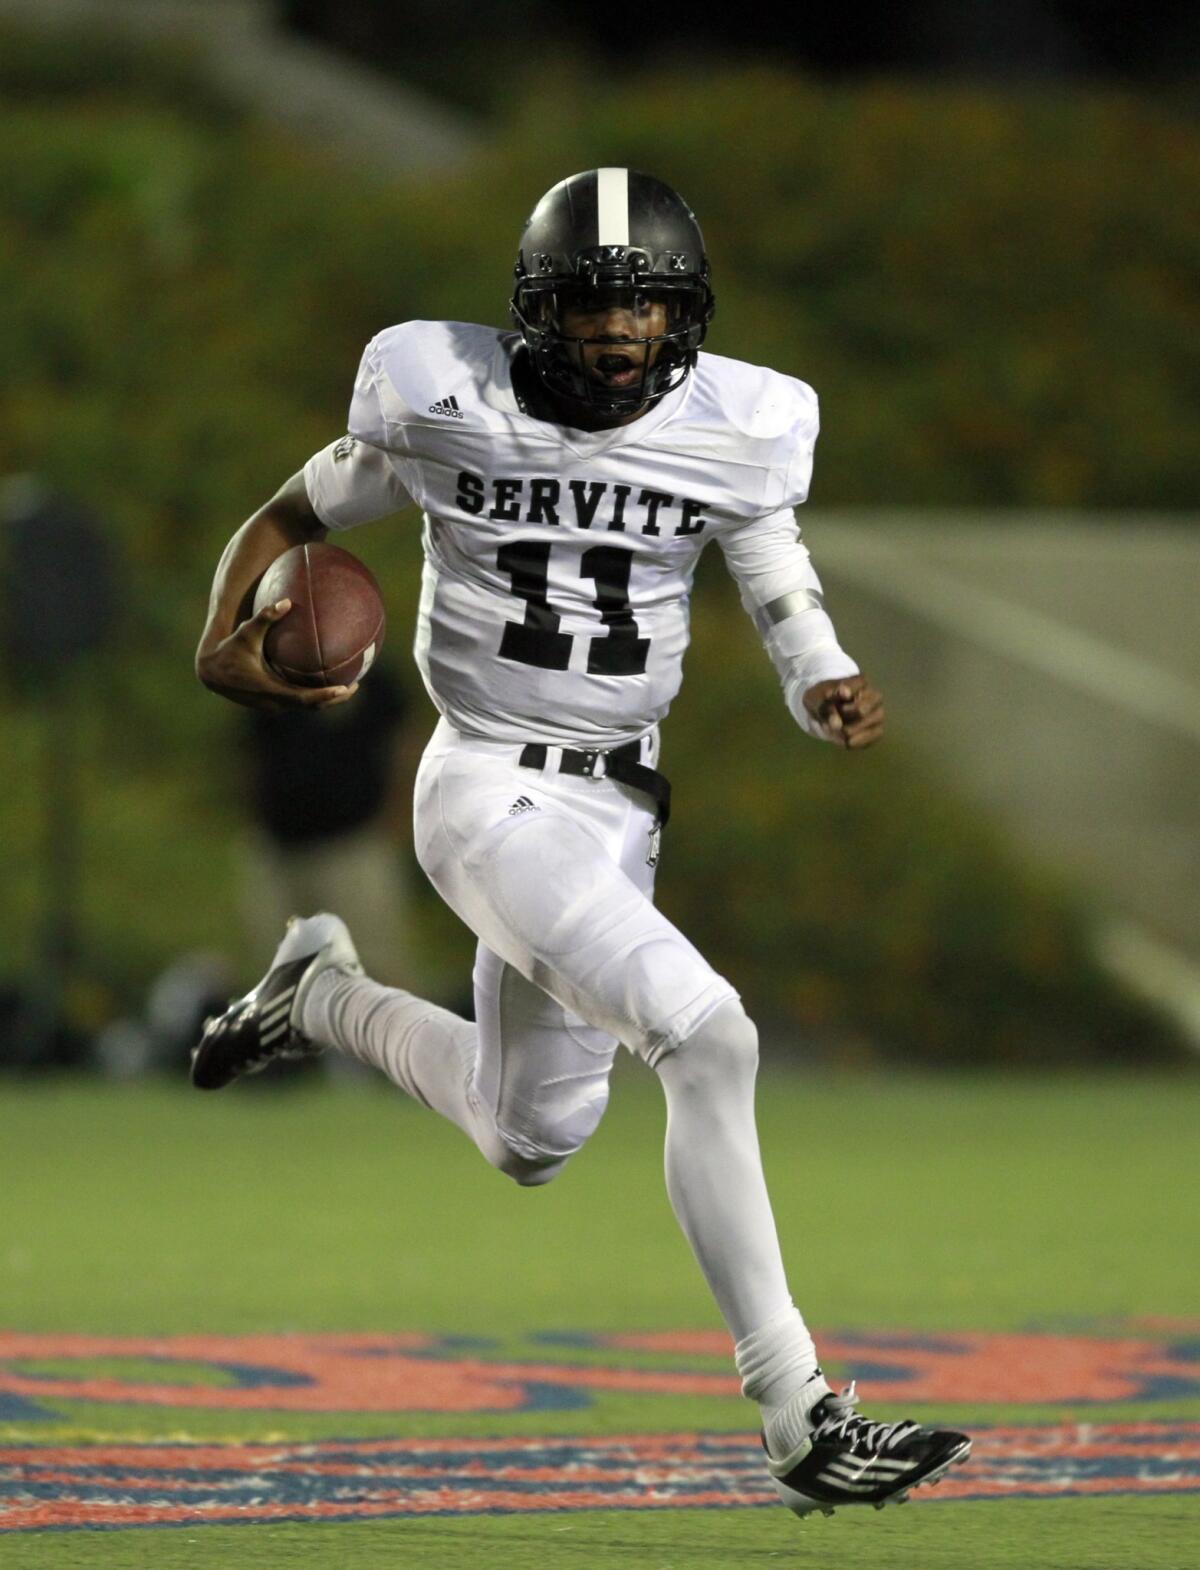 Servite quarterback Travis Waller runs the ball during a game against Edison last month. Servite moves up one spot in this week's rankings following its win Friday over Santa Margarita.